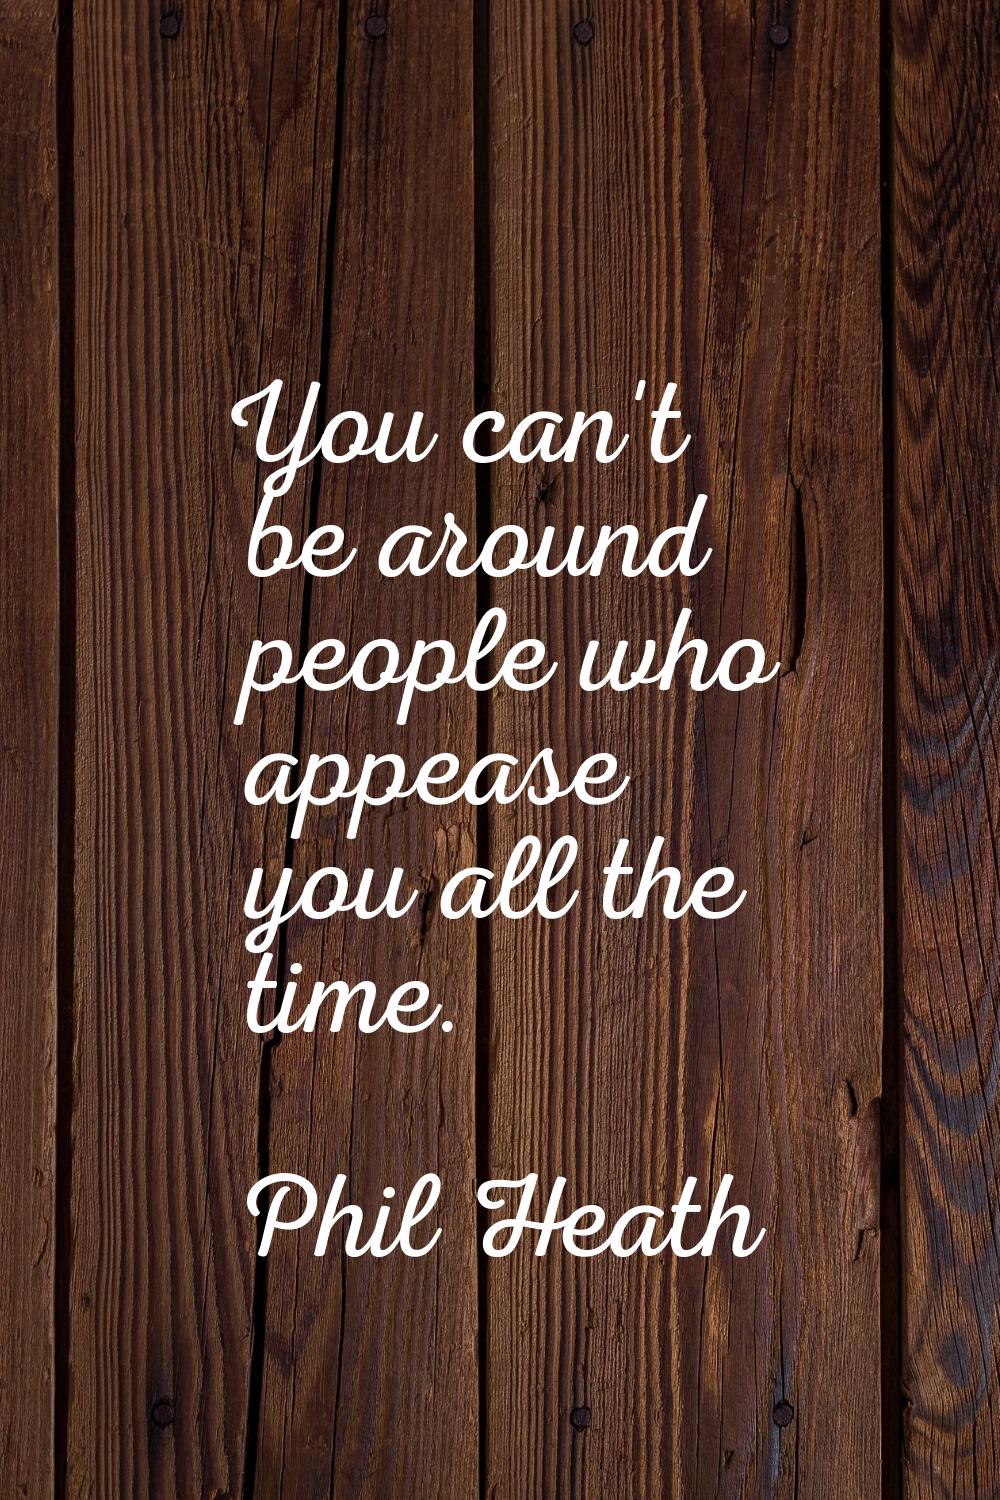 You can't be around people who appease you all the time.